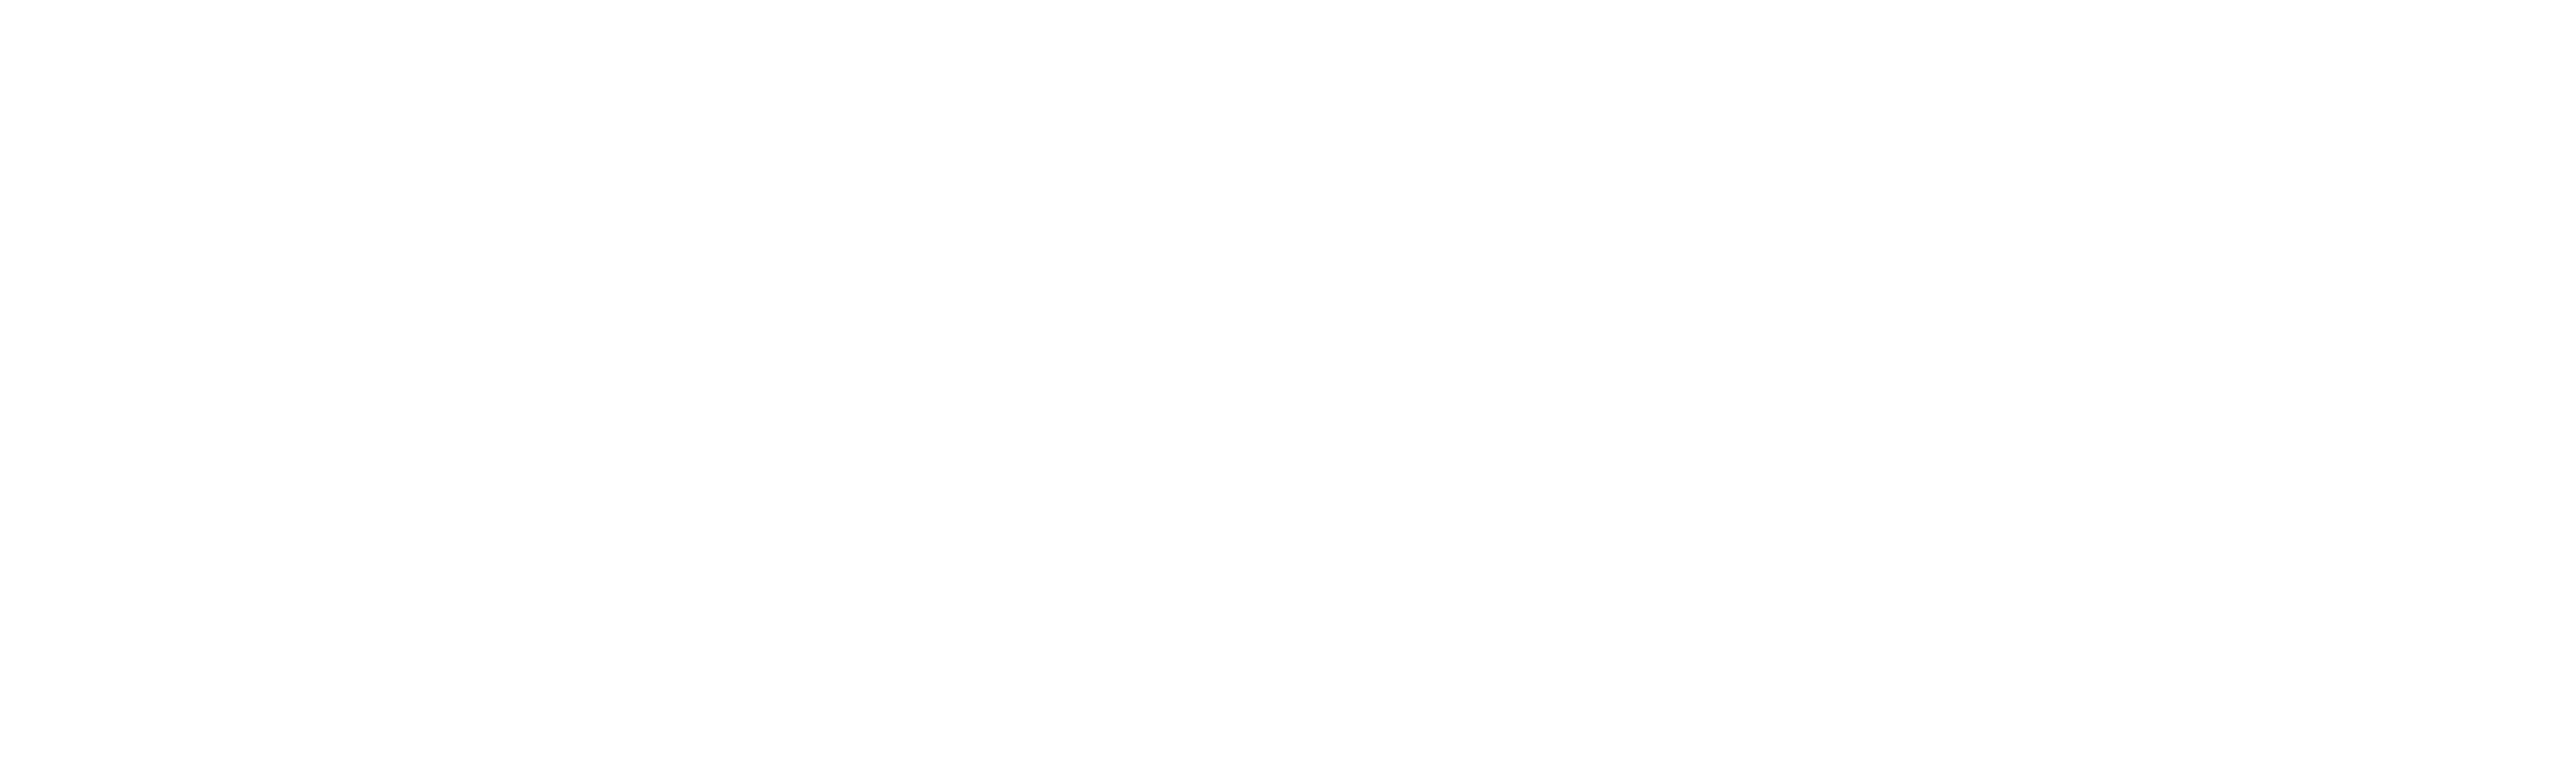 Tops or Tails: Double your money or more